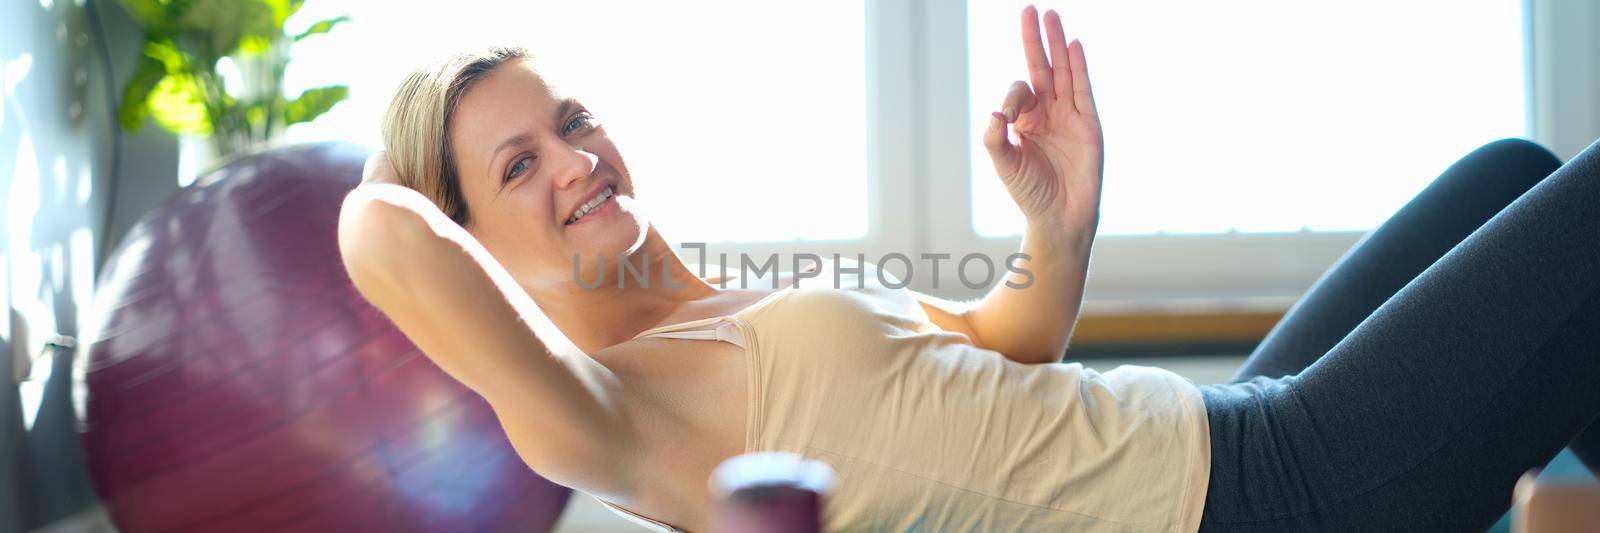 Smiling woman doing exercises on back roller by kuprevich